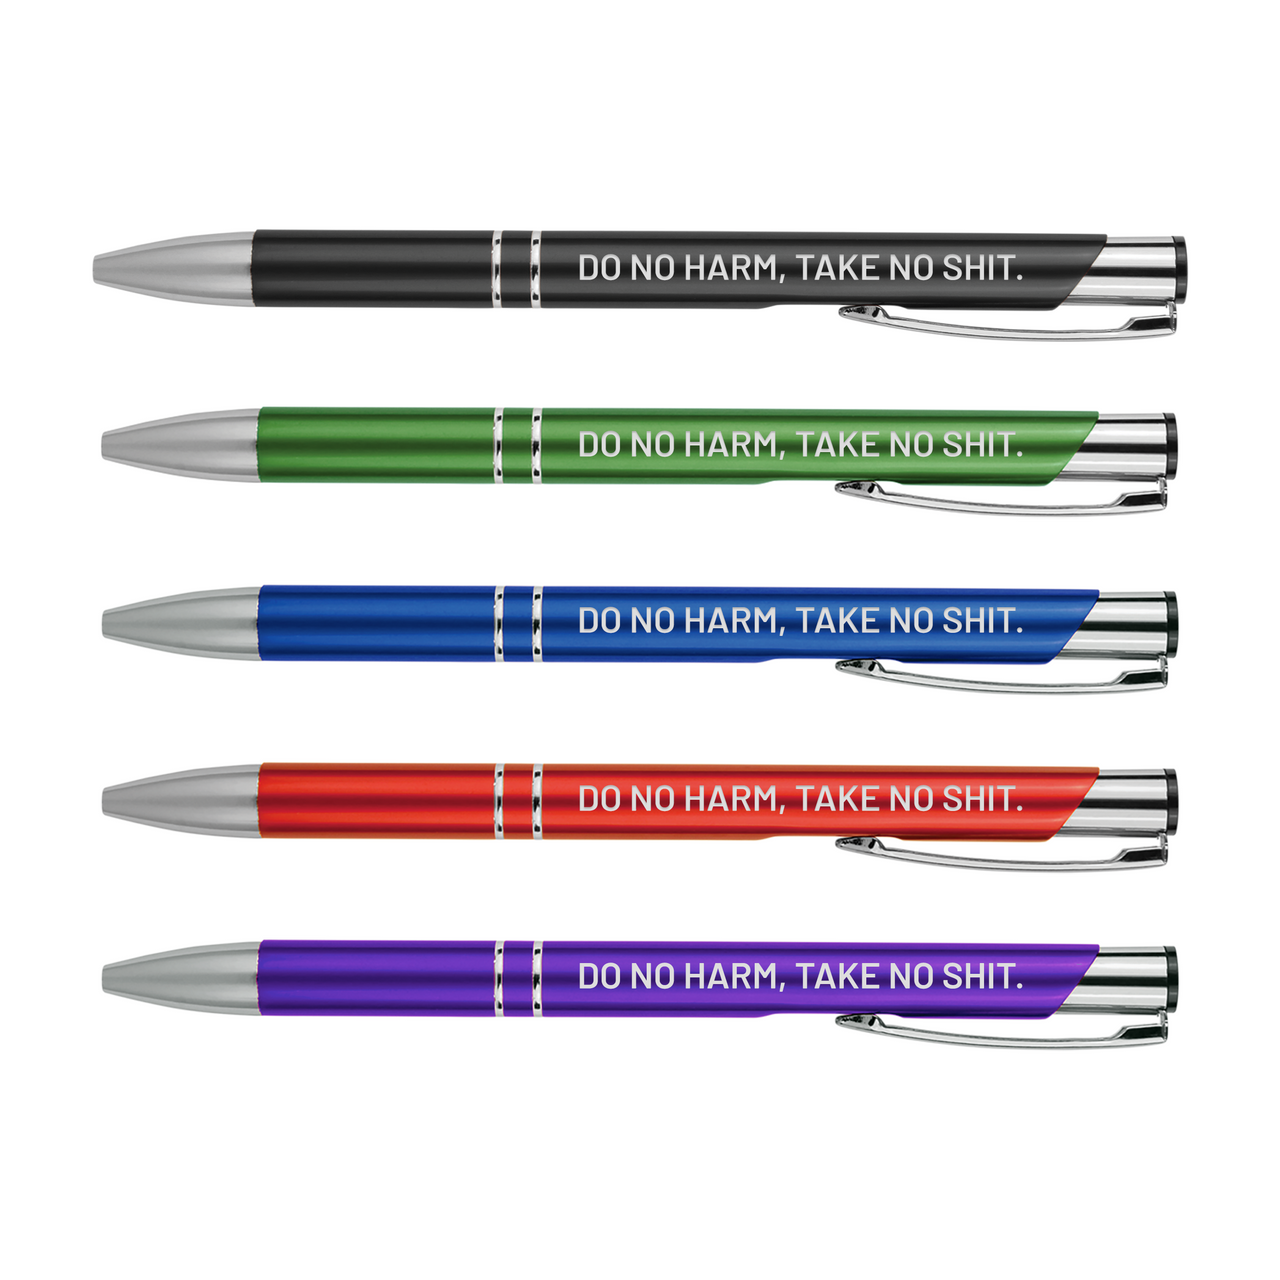 Do No Harm, Take No Shit Metal Pens | Motivational Writing Tools Office Supplies Coworker Gifts Stocking Stuffer Baum Designs